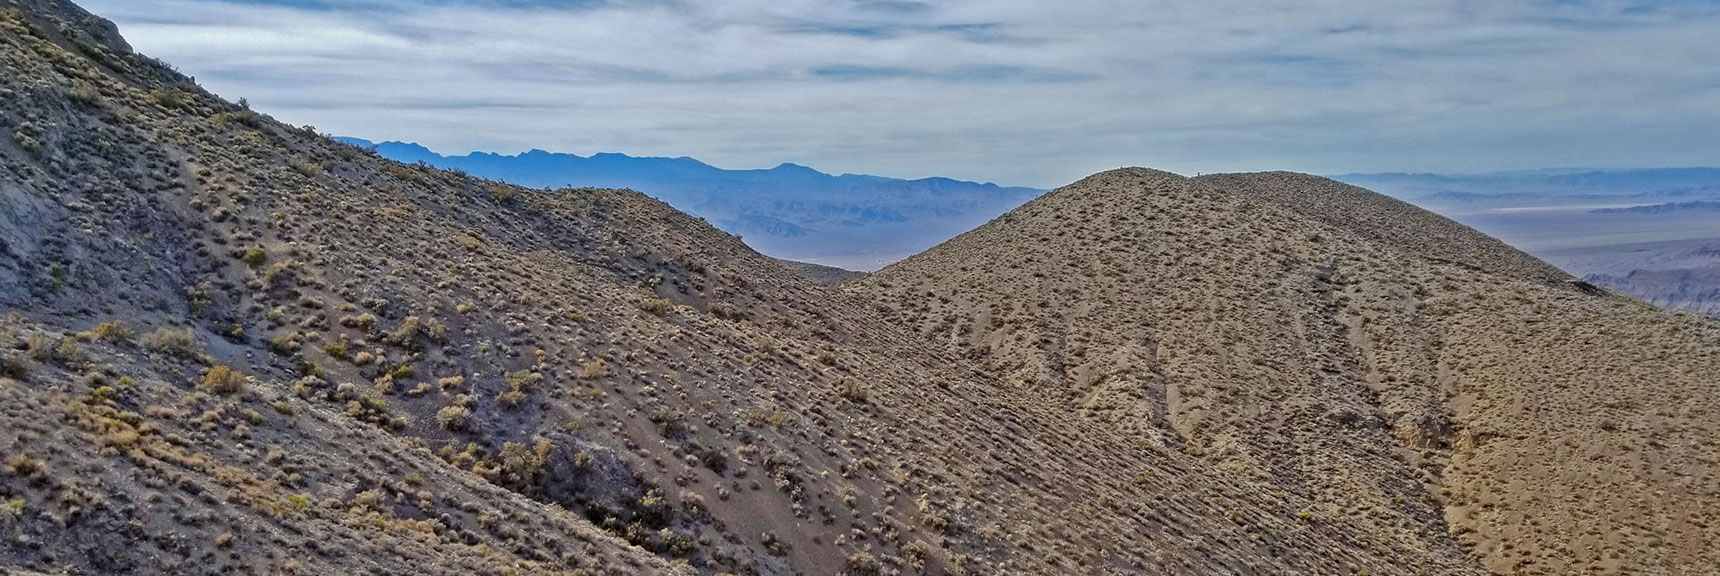 Avalanche Slope Requires Every Foot Placement to be Secure, Lasting at Least 2 Seconds! | Gass Peak Grand Crossing | Desert National Wildlife Refuge to Centennial Hills Las Vegas via Gass Peak Summit by Foot